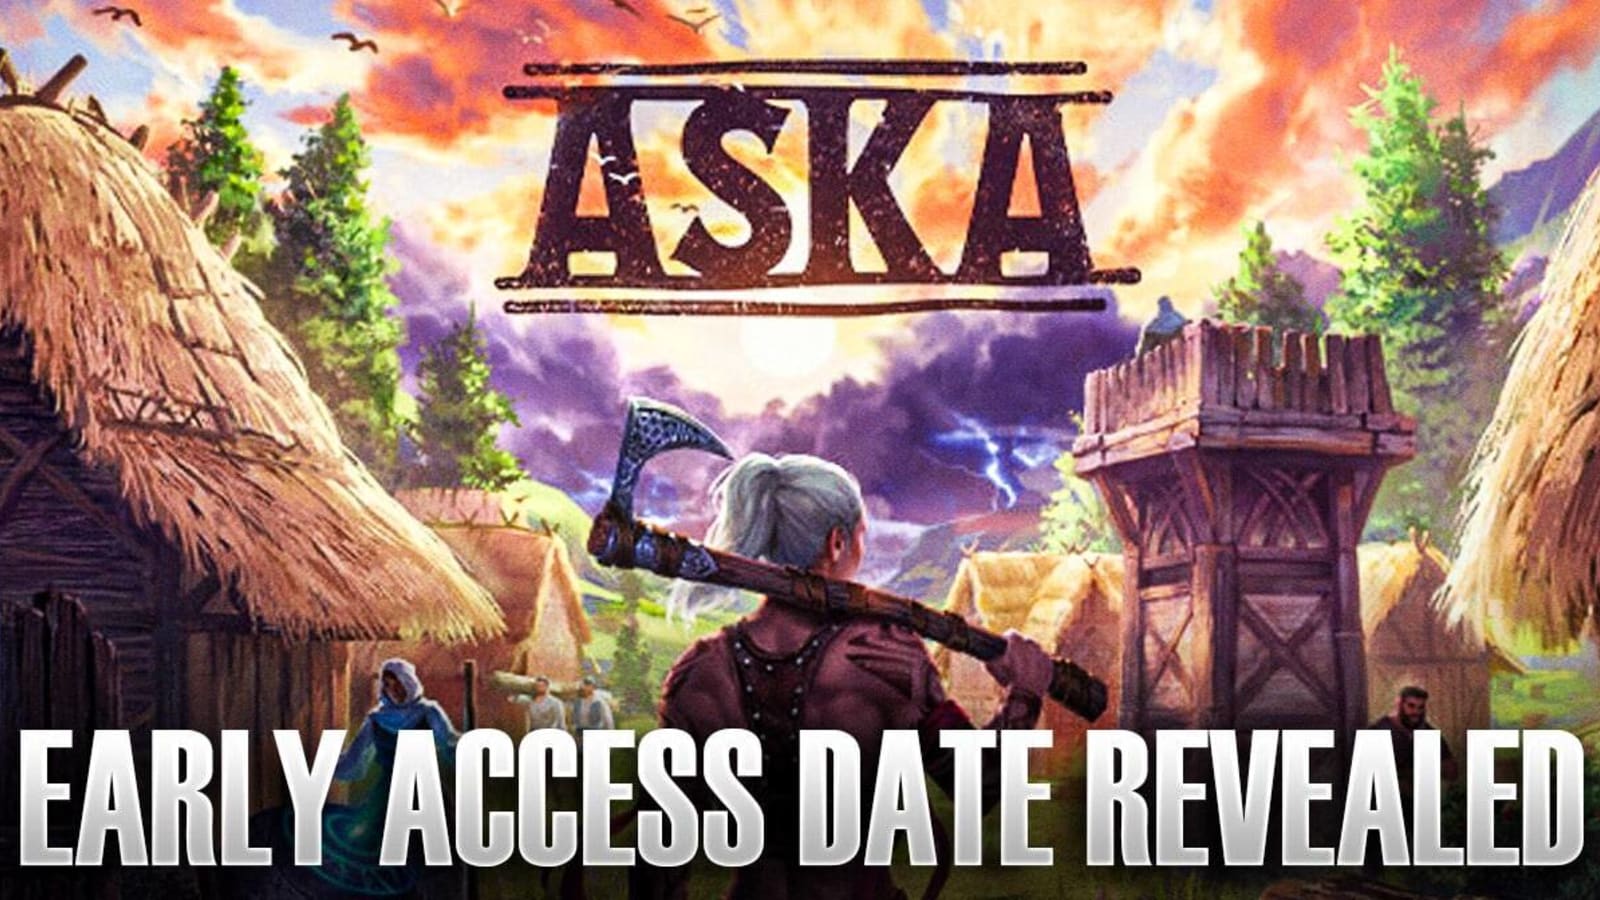 Aska Early Access Date Revealed